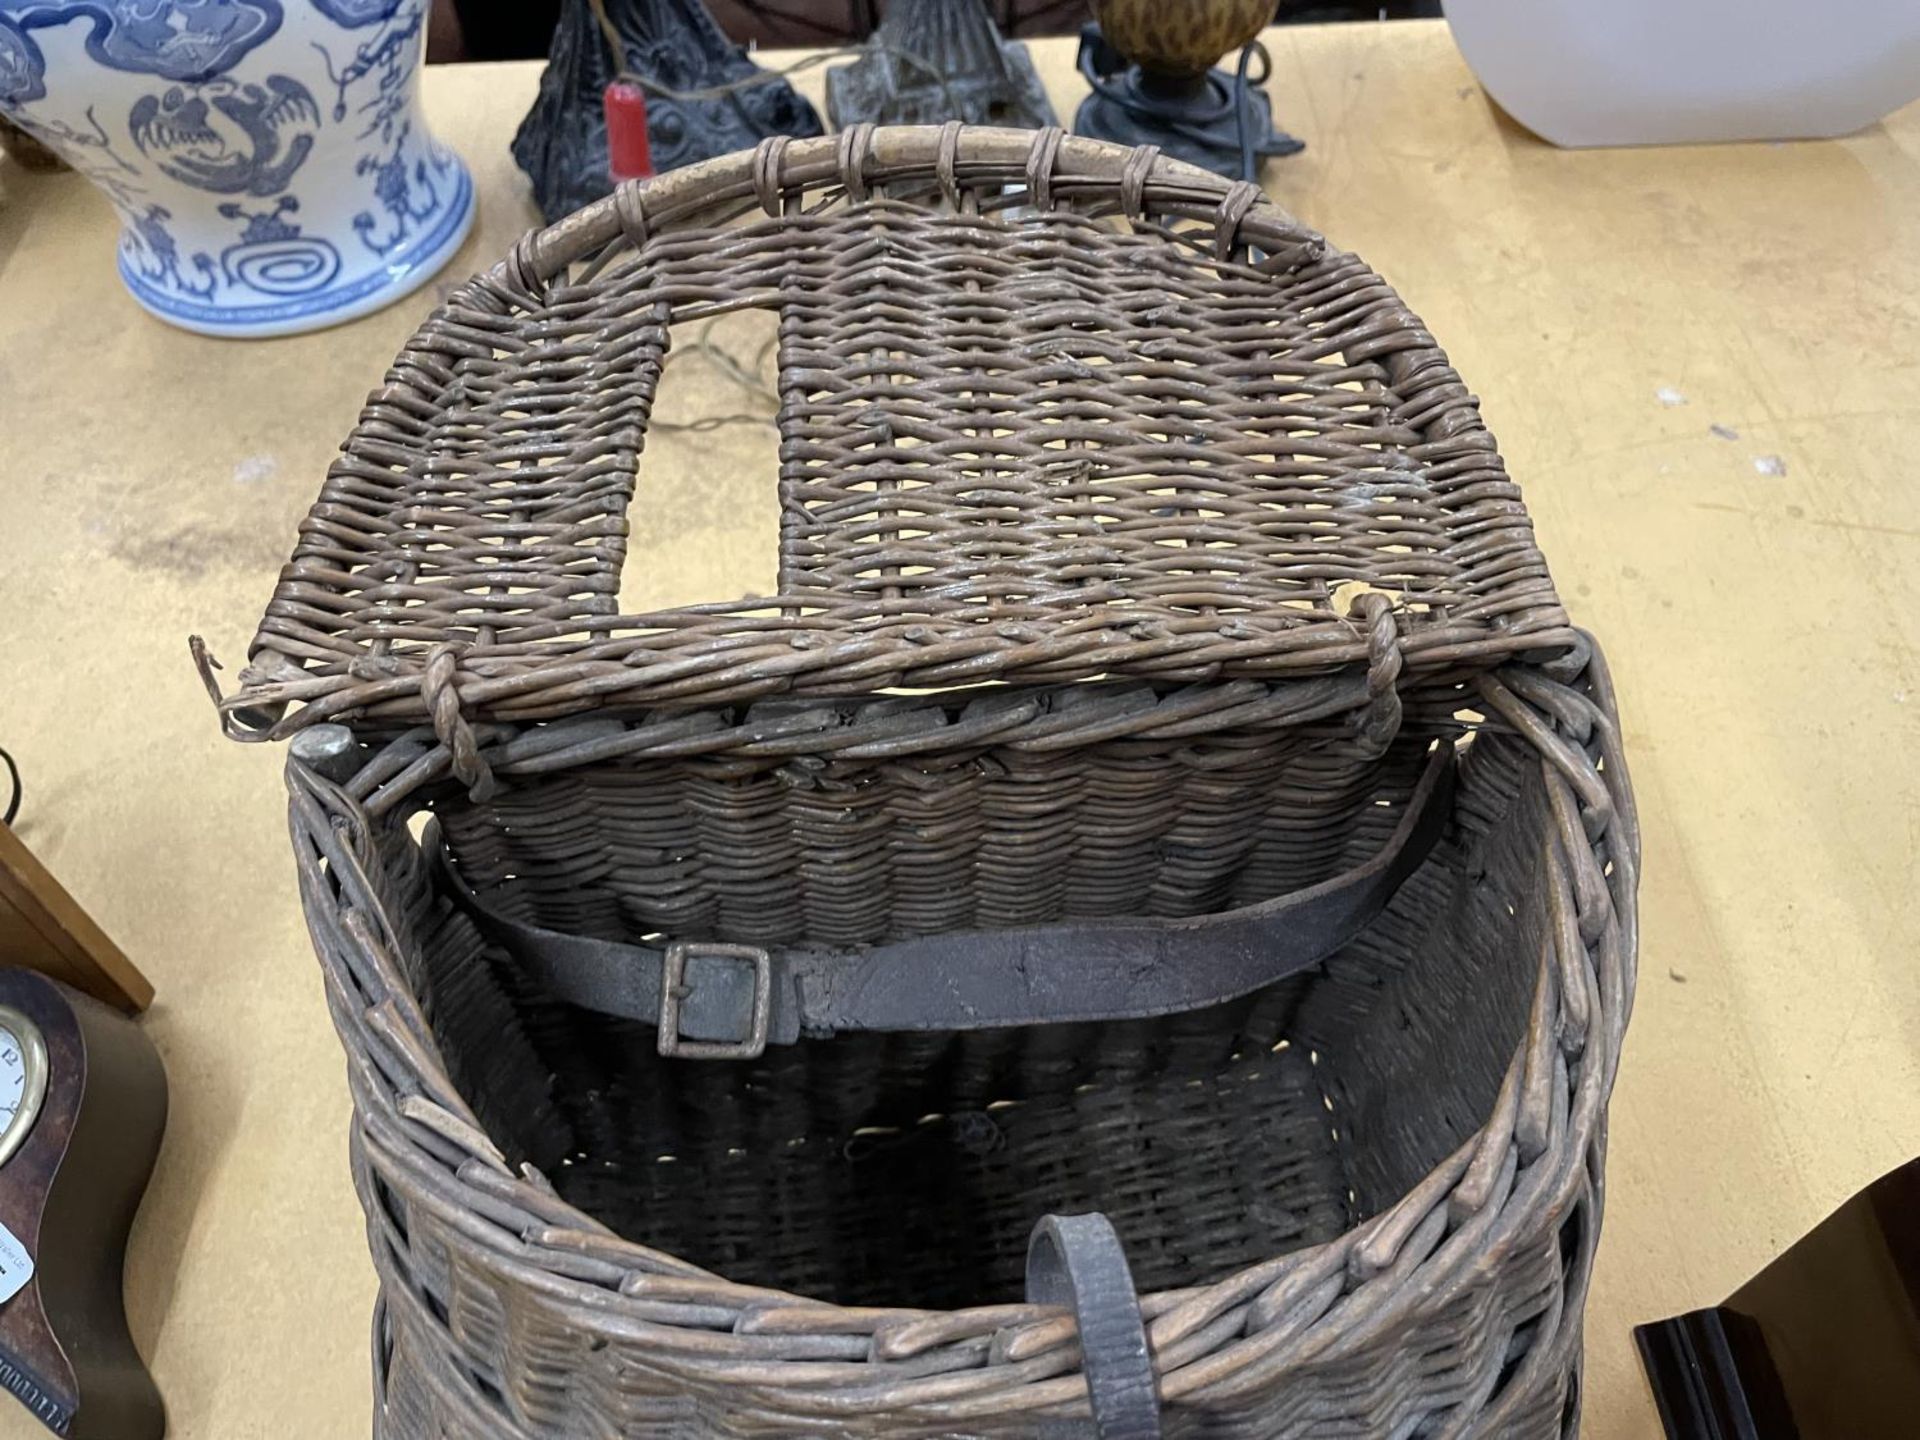 A VINTAGE FISHING CREEL BASKET WITH STRAPS HEIGHT 24CM, LENGTH 27CM - Image 2 of 2